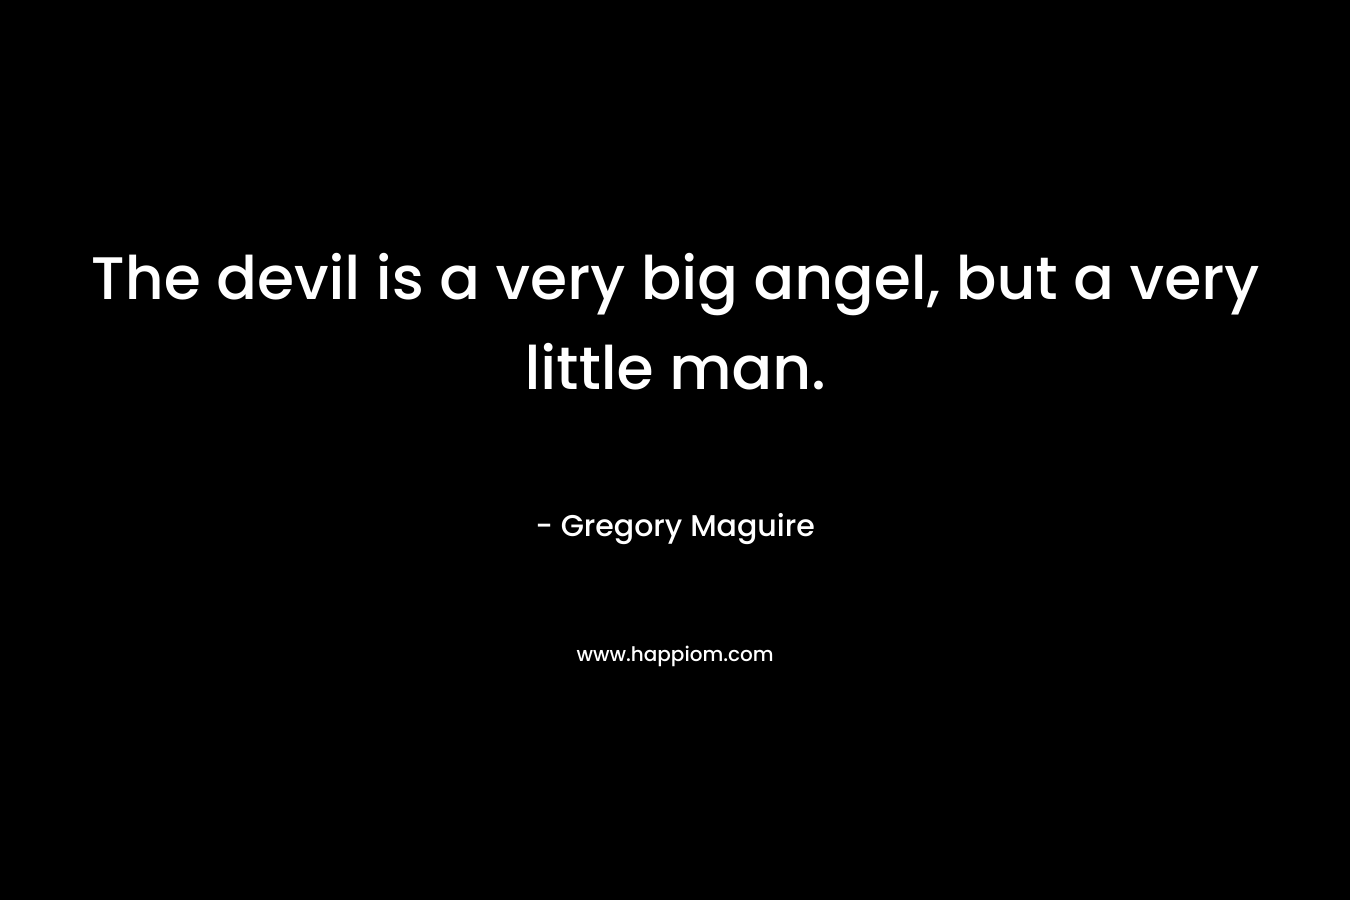 The devil is a very big angel, but a very little man.